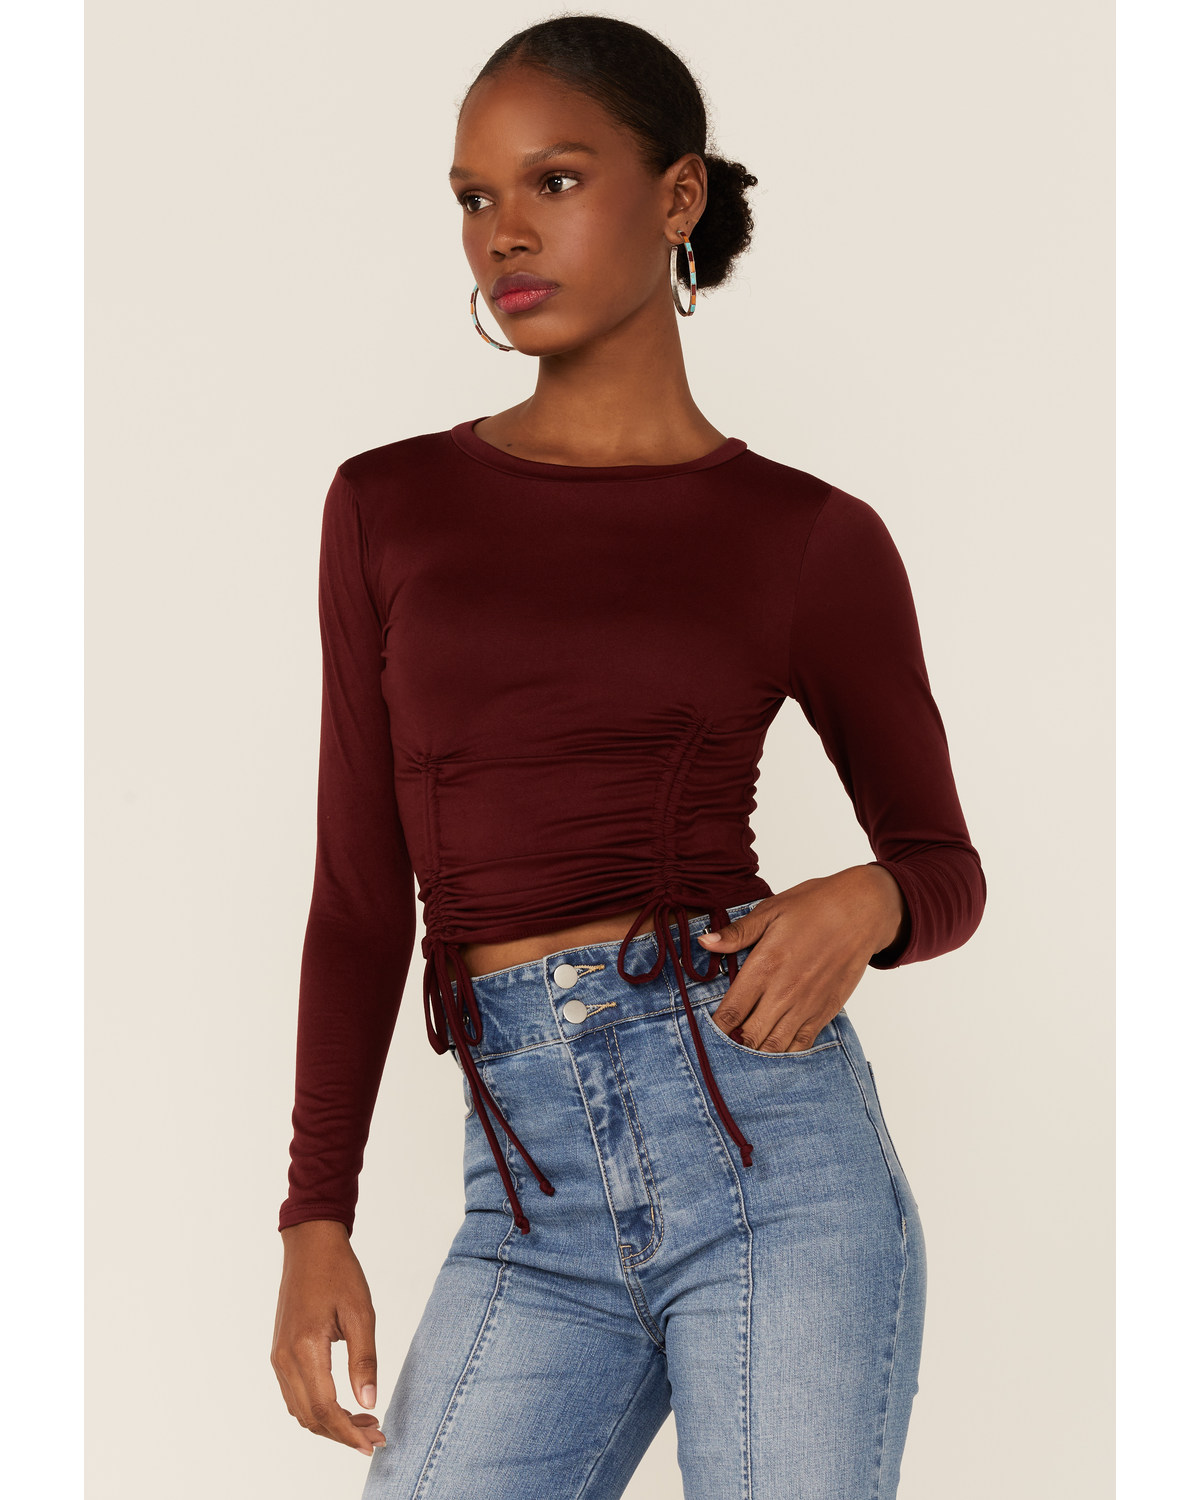 Moa Women's Cinched Top